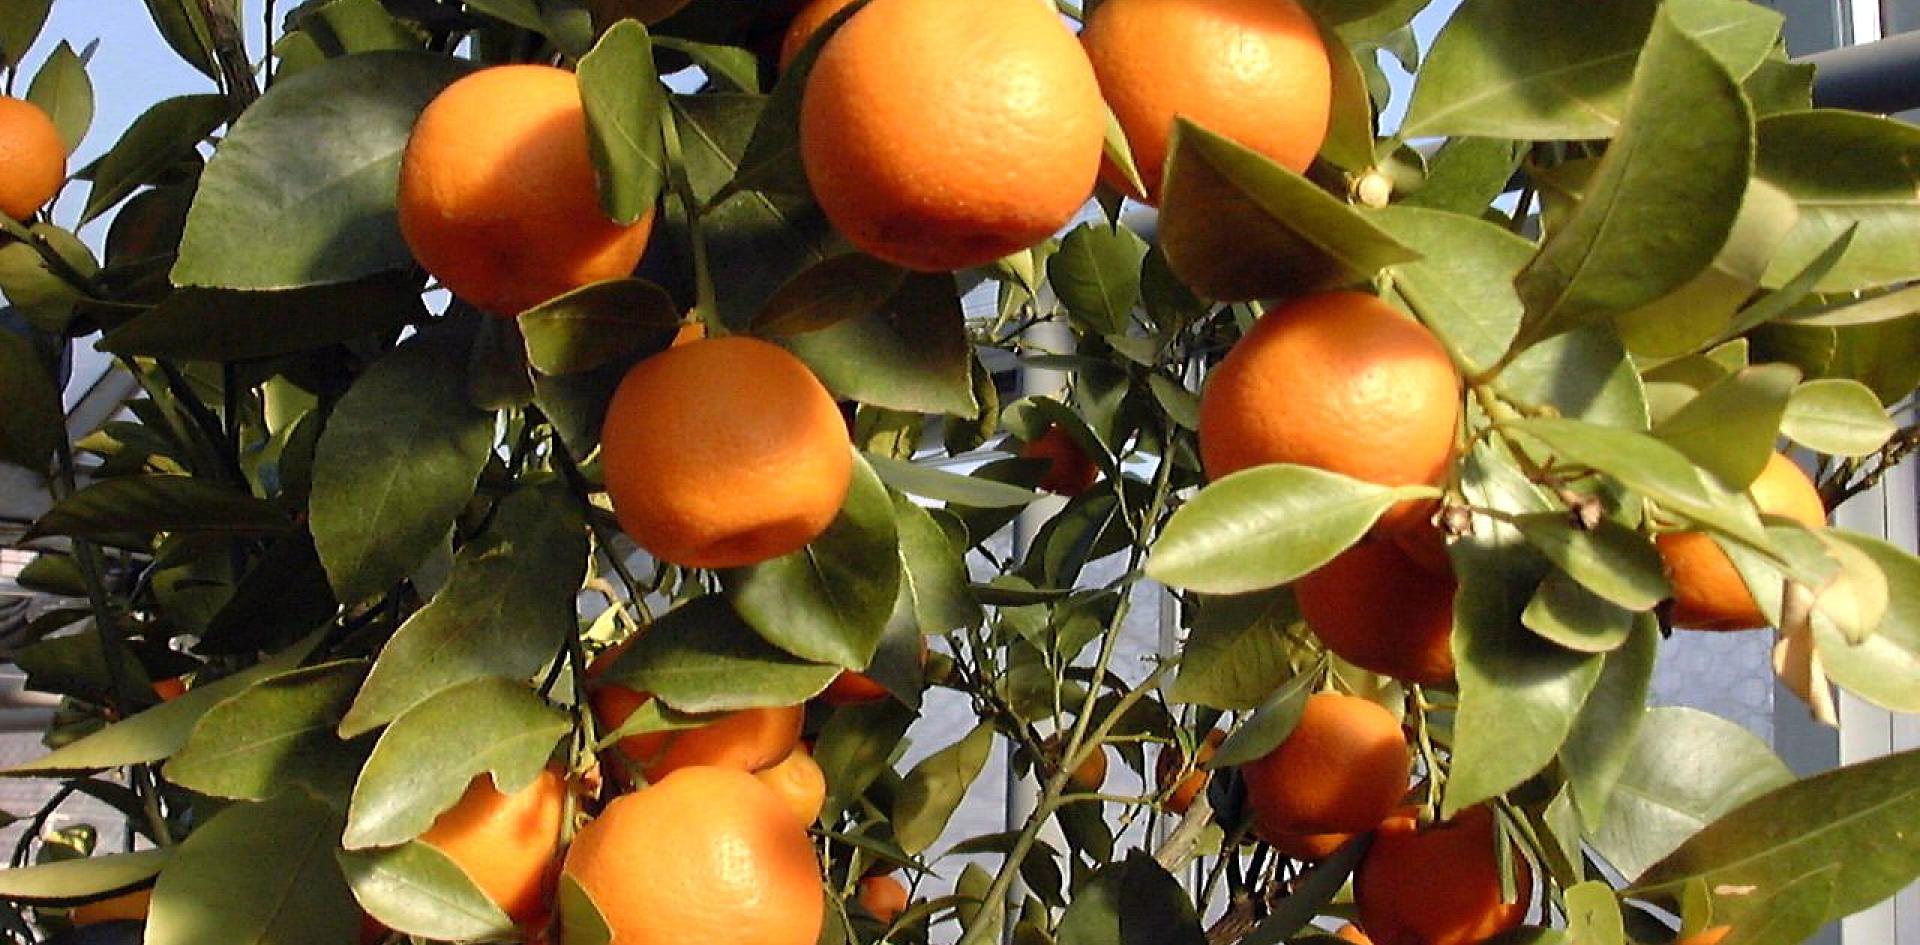 Viveros Alcanar has two activities, a nursery for citrus plants covering 40 hectares and a citrus production operation in pots which covers 12 hectares